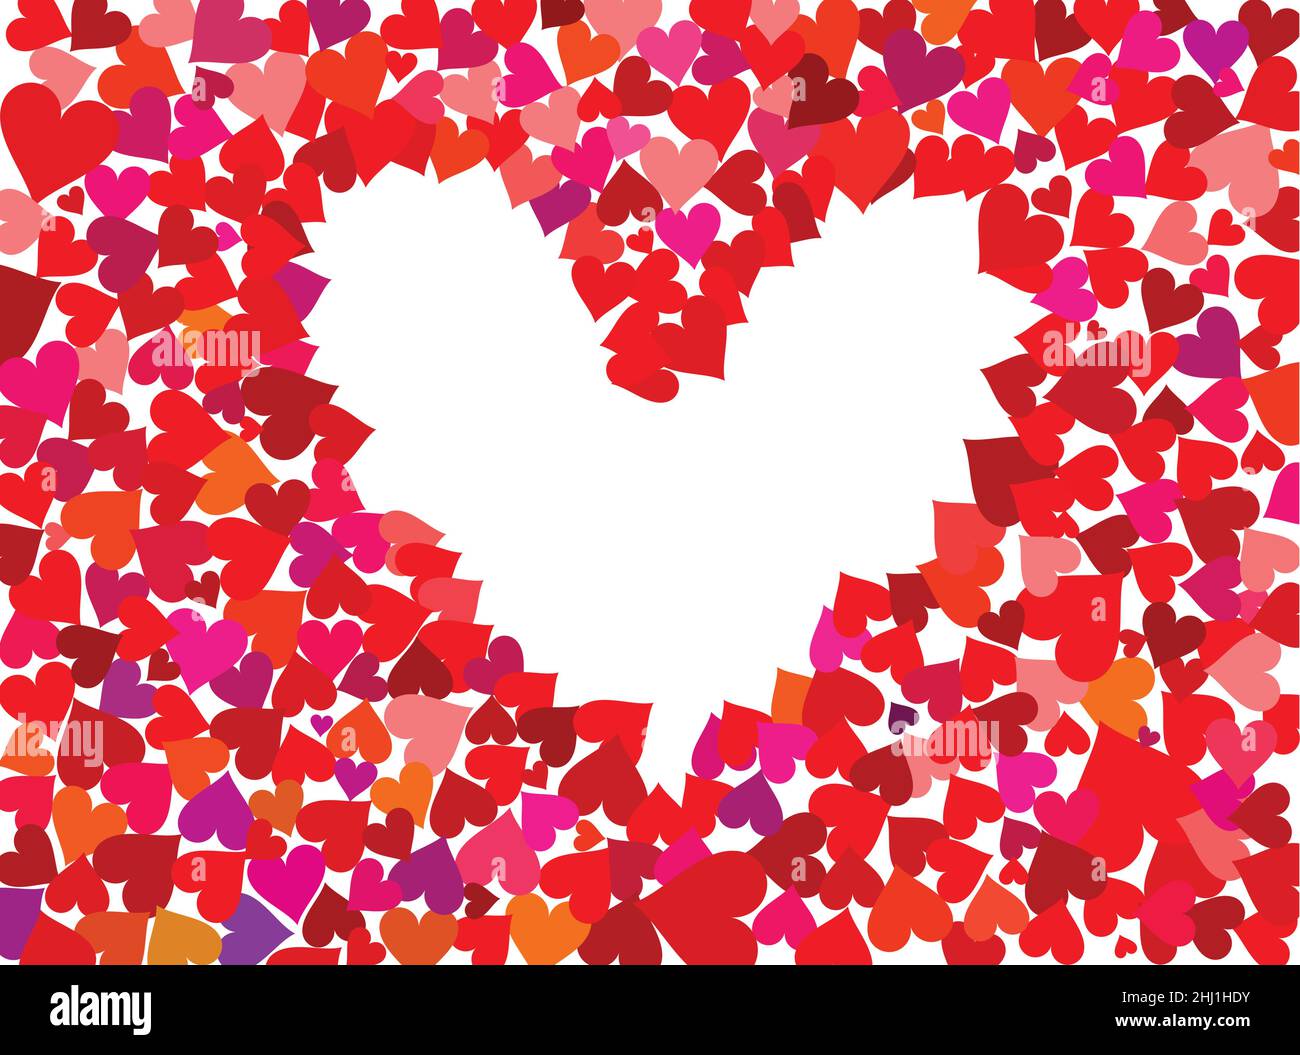 Vector illustration with blank empty space in the center for text shaped with small red hearts Stock Vector